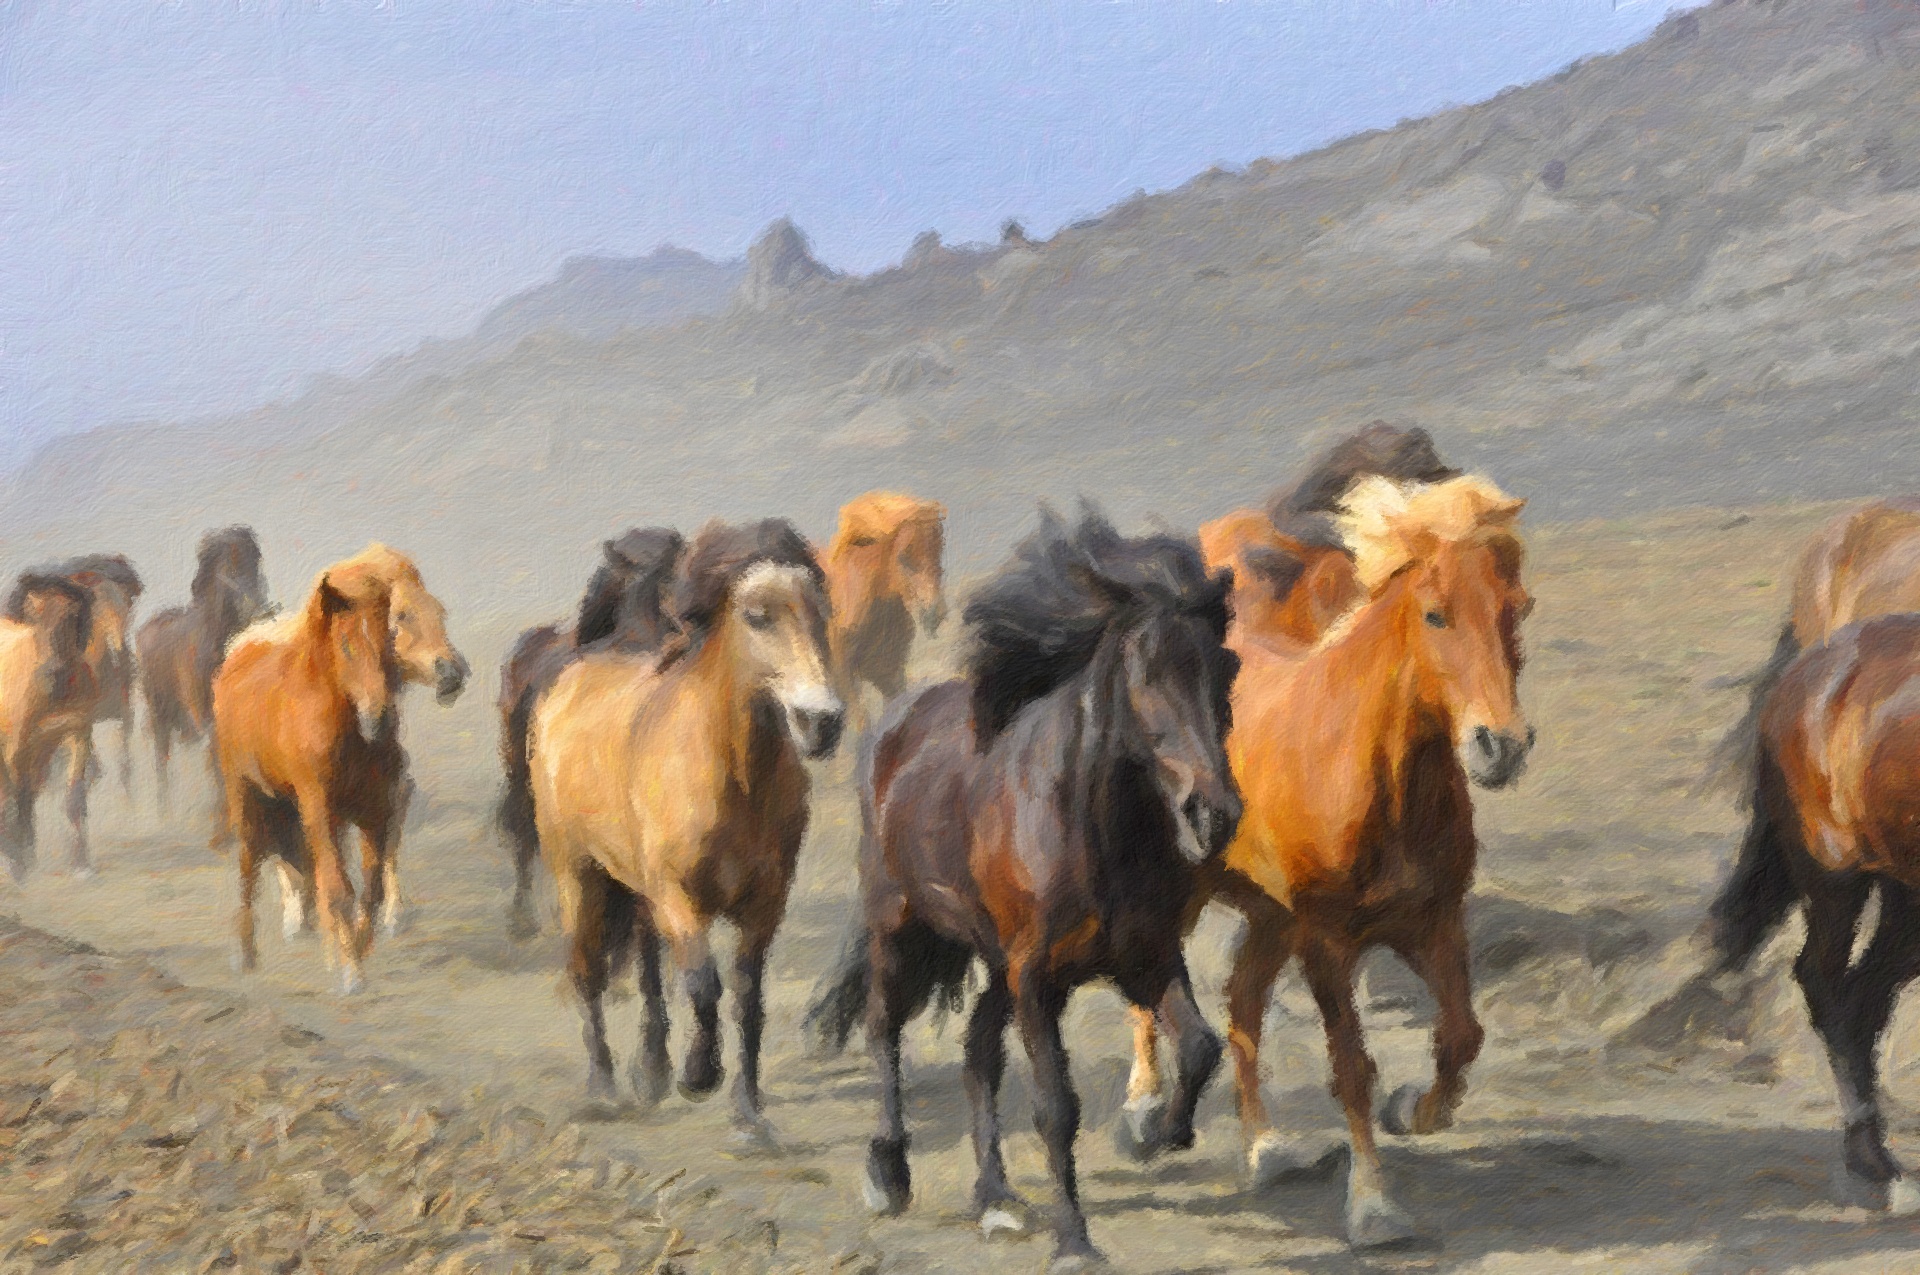 Wild Horses Oil Painting, found here Original ID 49200, digital oil painting